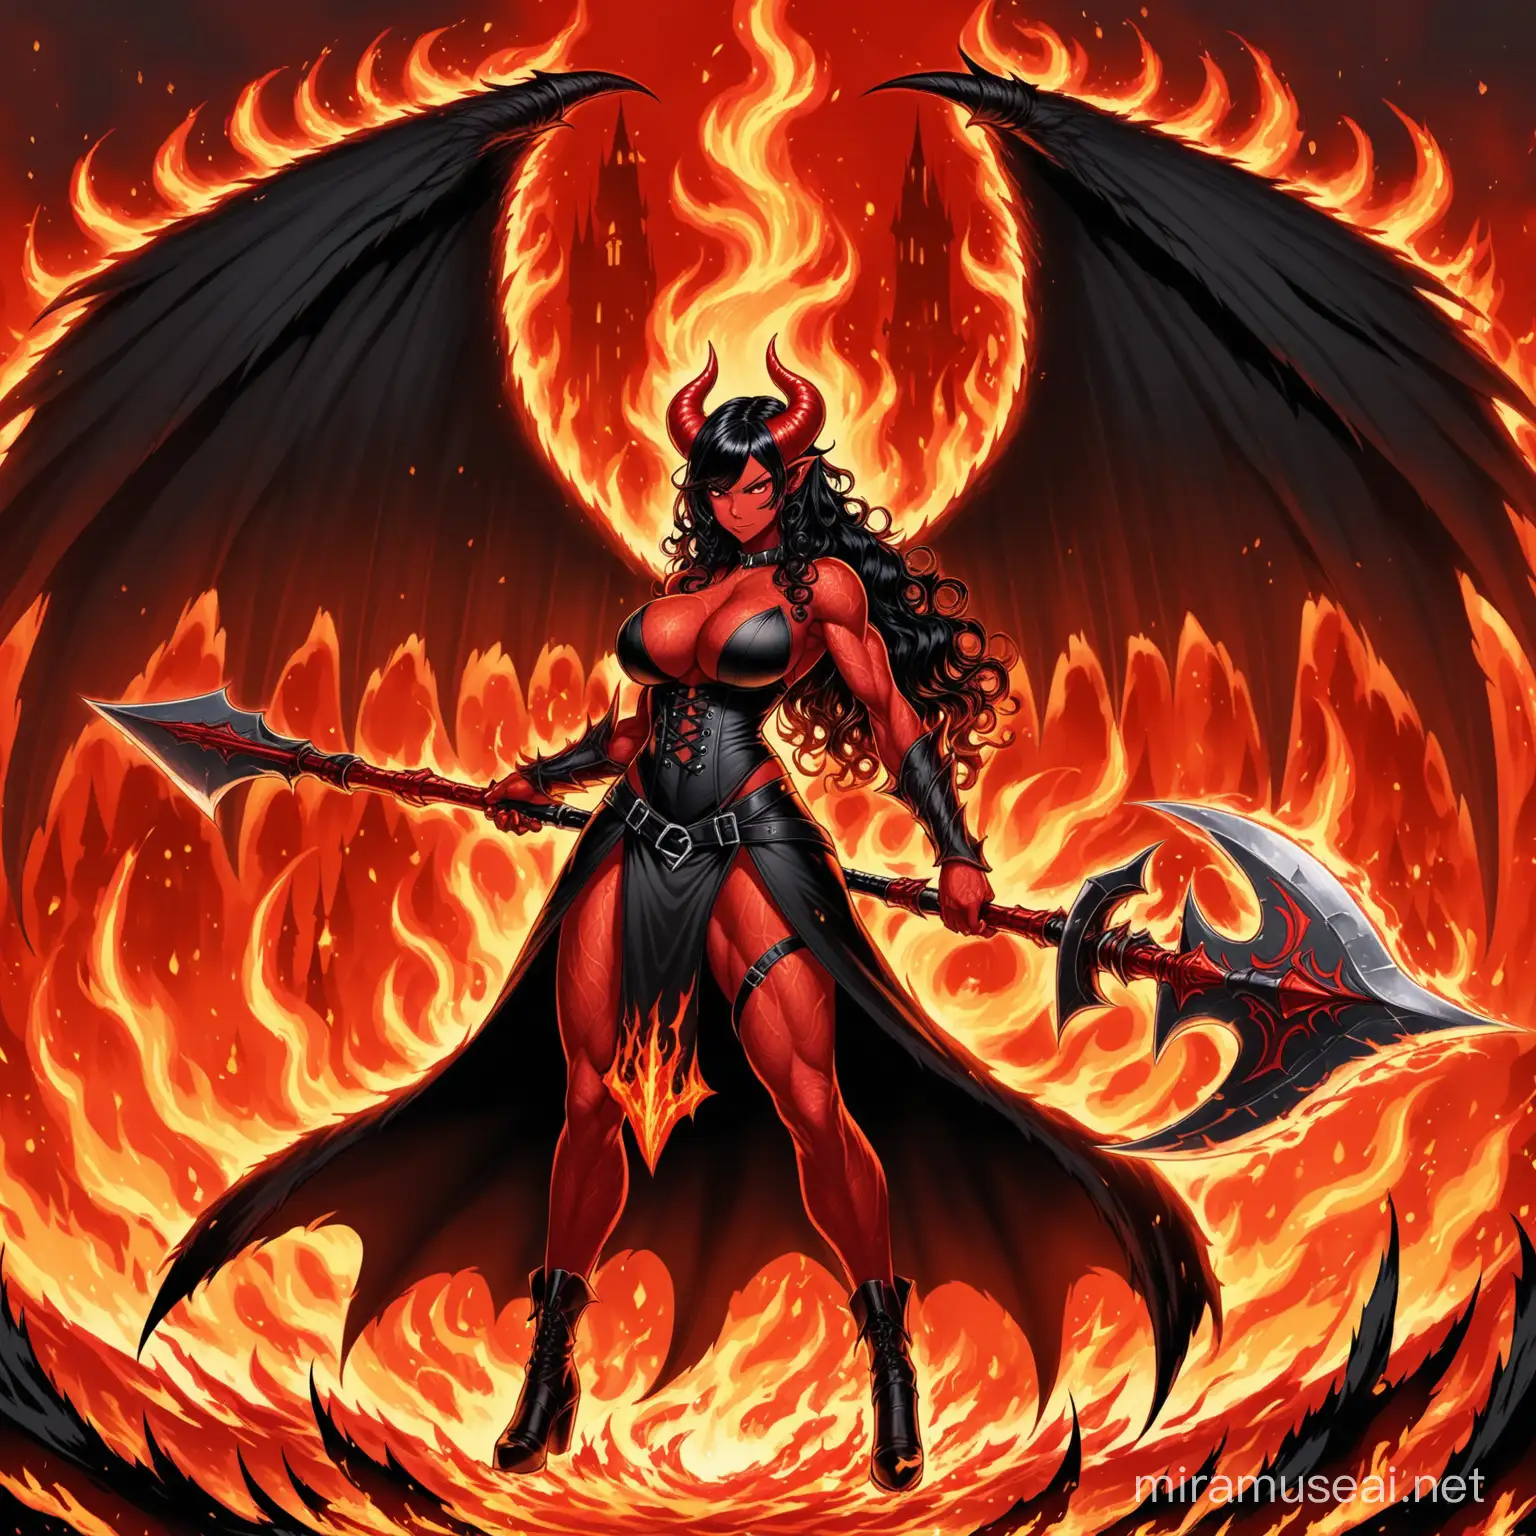 talll voluptuous muscular red skin devil female with long curly black hair, red eyes, horns, large black wings, tail wearing a black corset while wielding a great halberd-axe engulfed by red flames